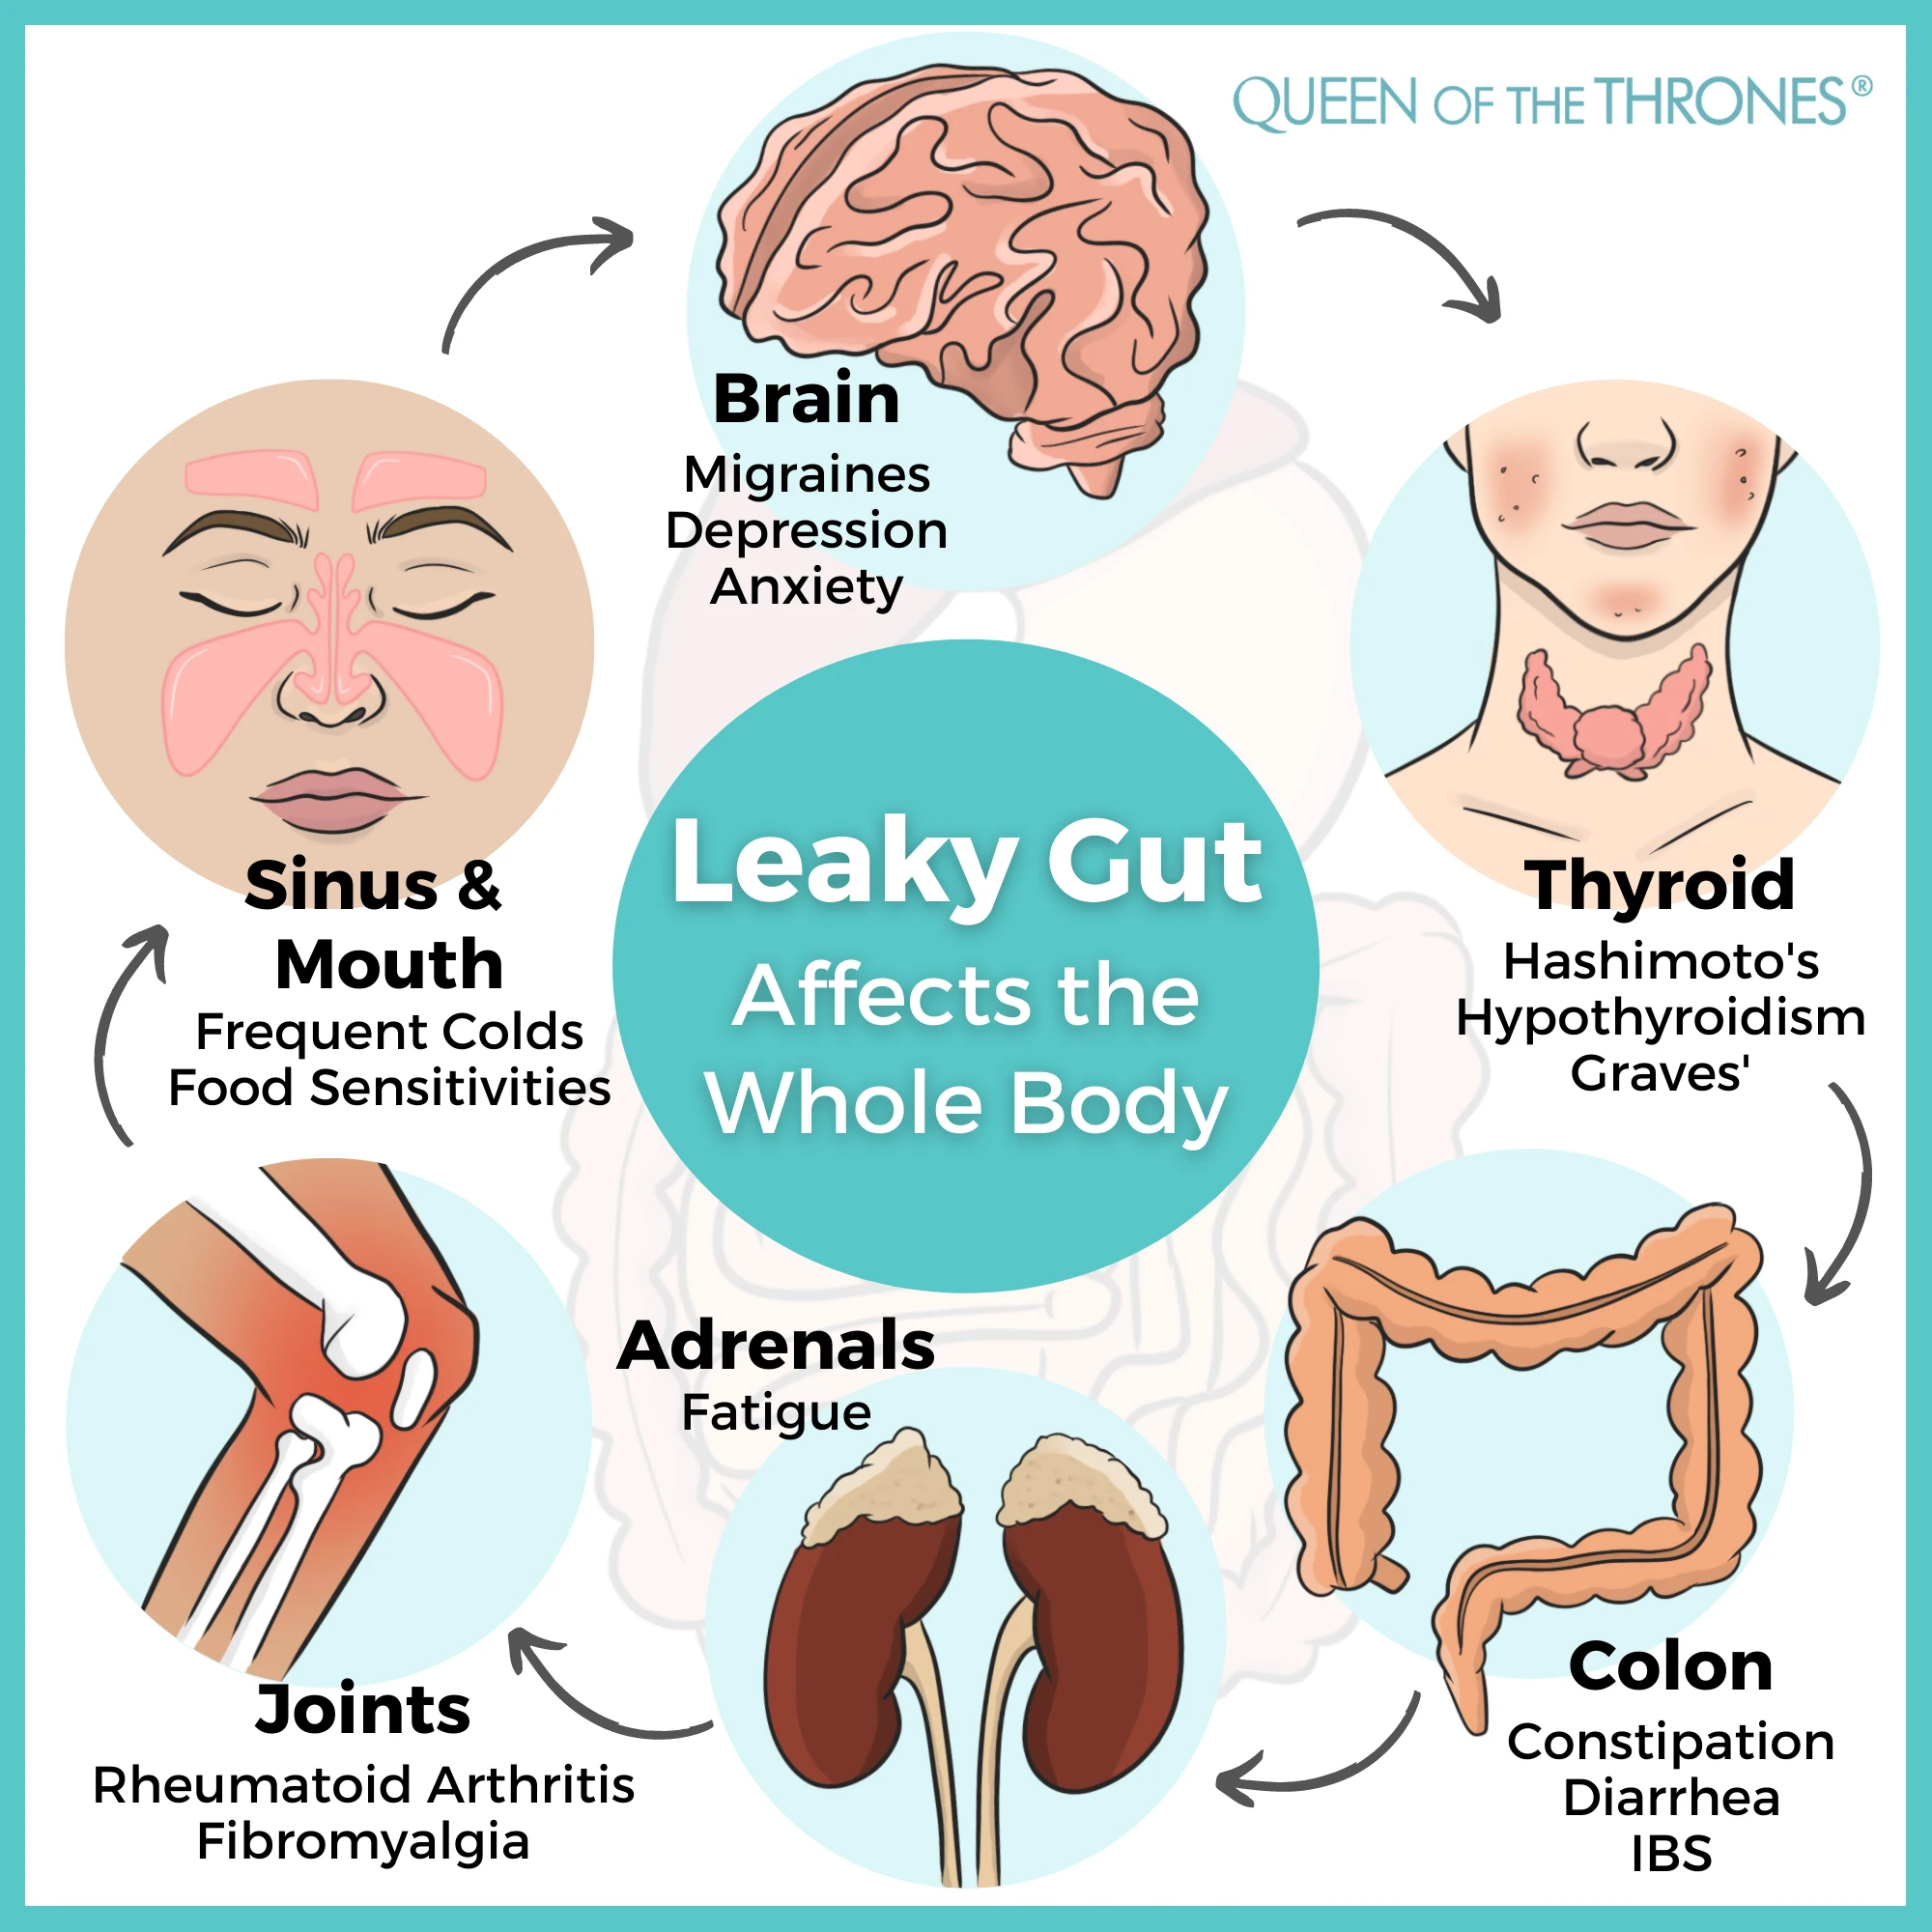 rgans affected by Leaky Gut according to Queen of the the Thrones